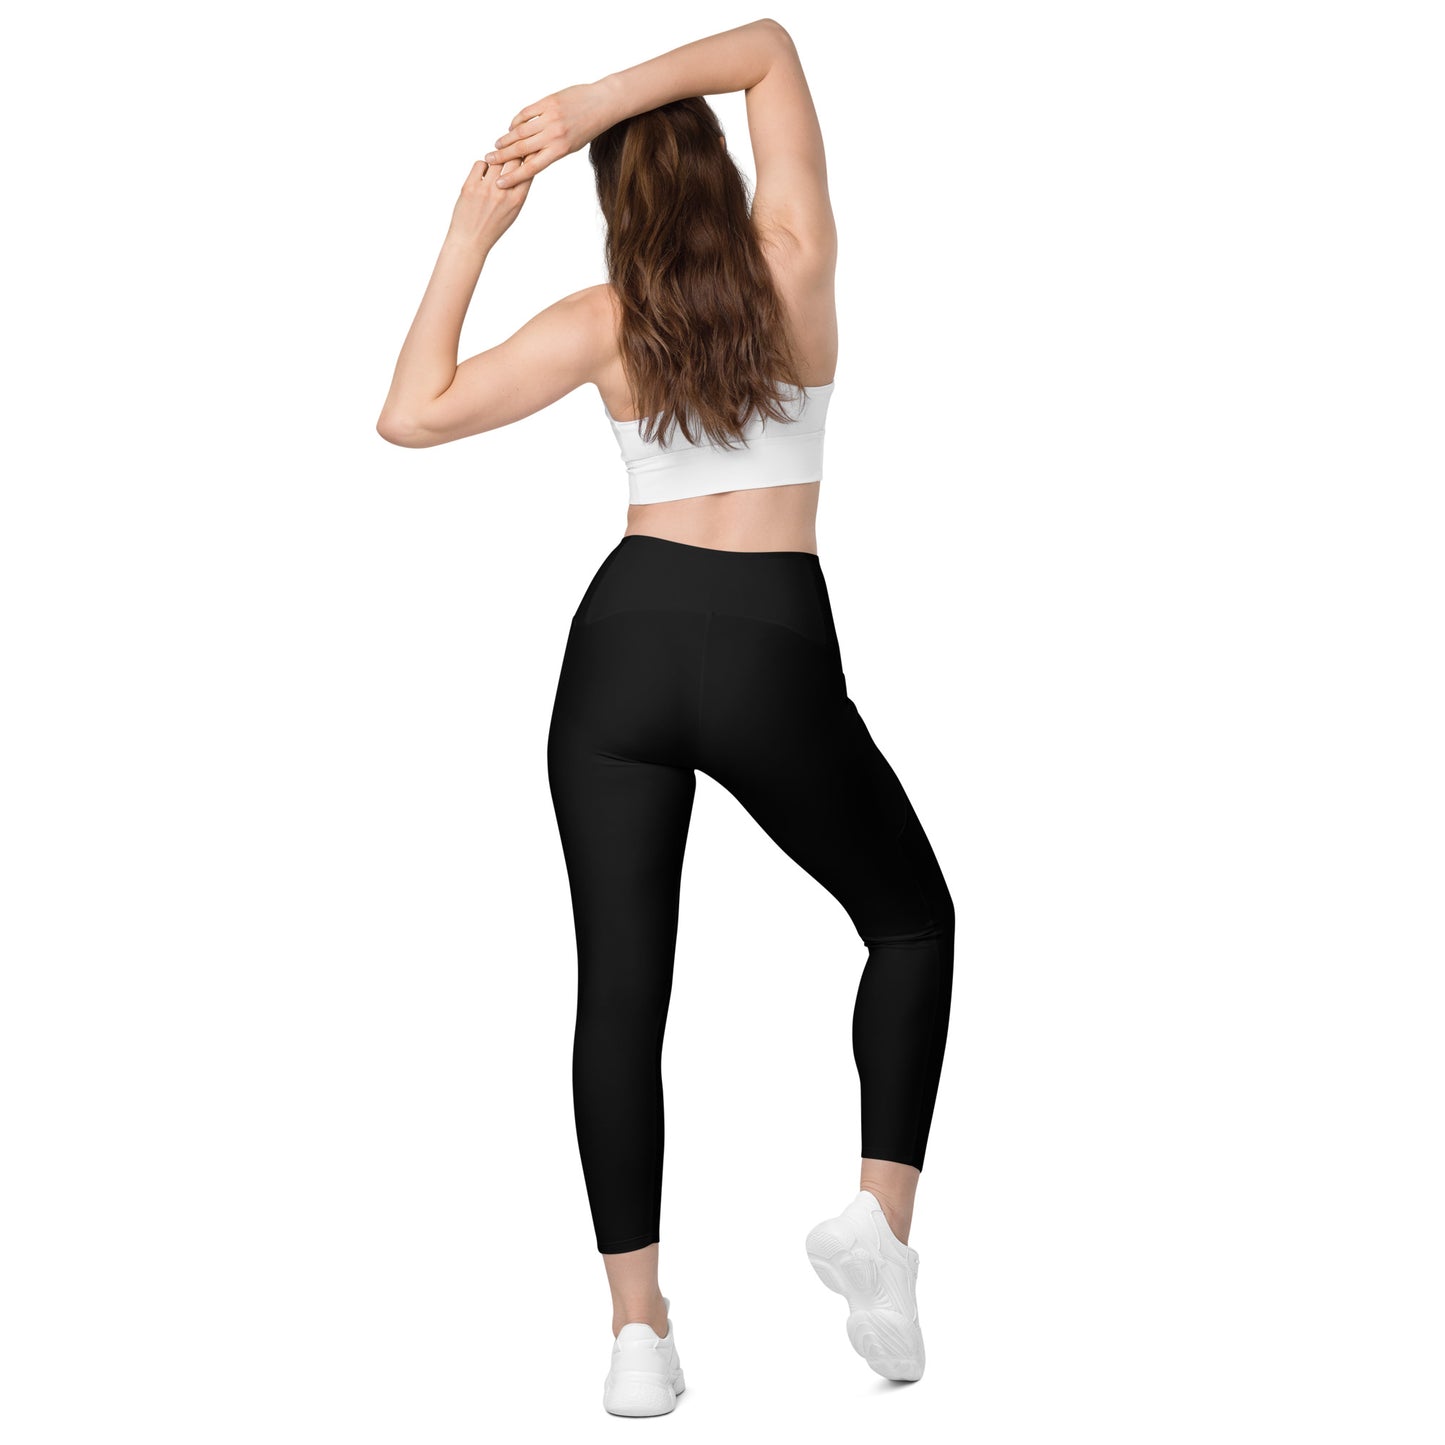 A picture of a woman standing in a yoga pose wearing Black Leggings with Pockets - back side